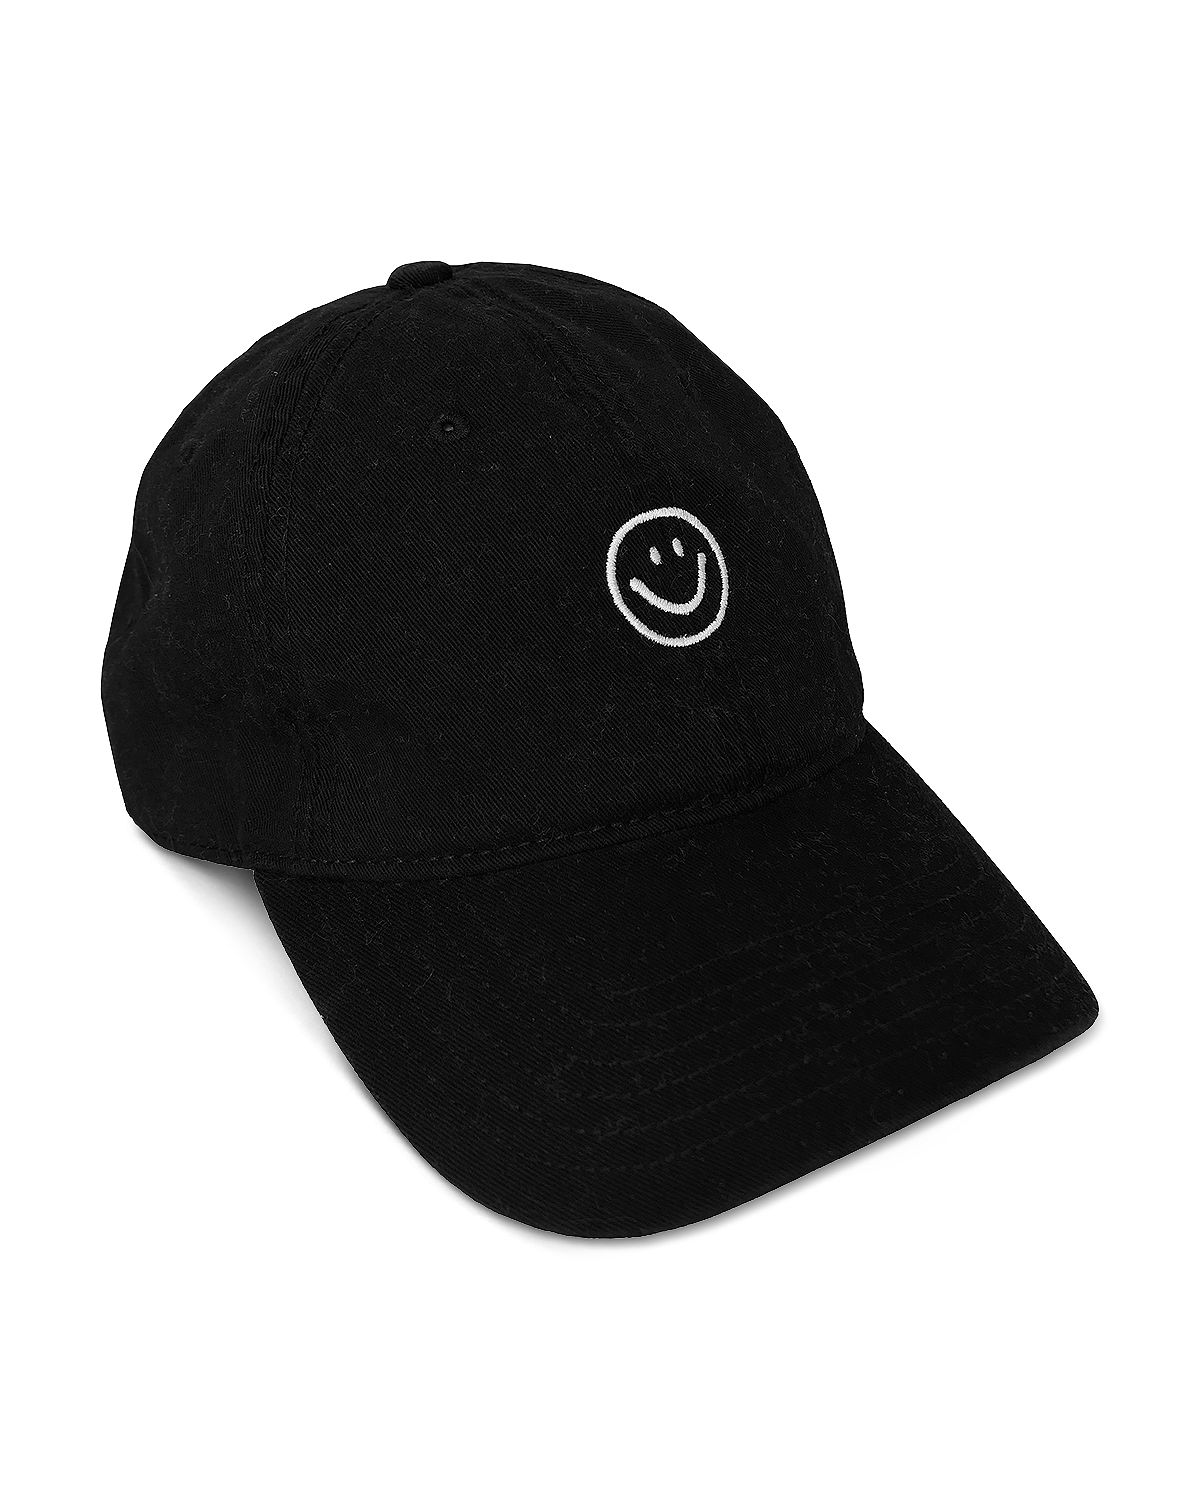 Photo 1 of KERRI ROSENTHAL Smiley Baseball Hat Black
Caps can be adjusted +/- 7 cm using buckle strap
Embroidered smiley face
Shell: 100% cotton